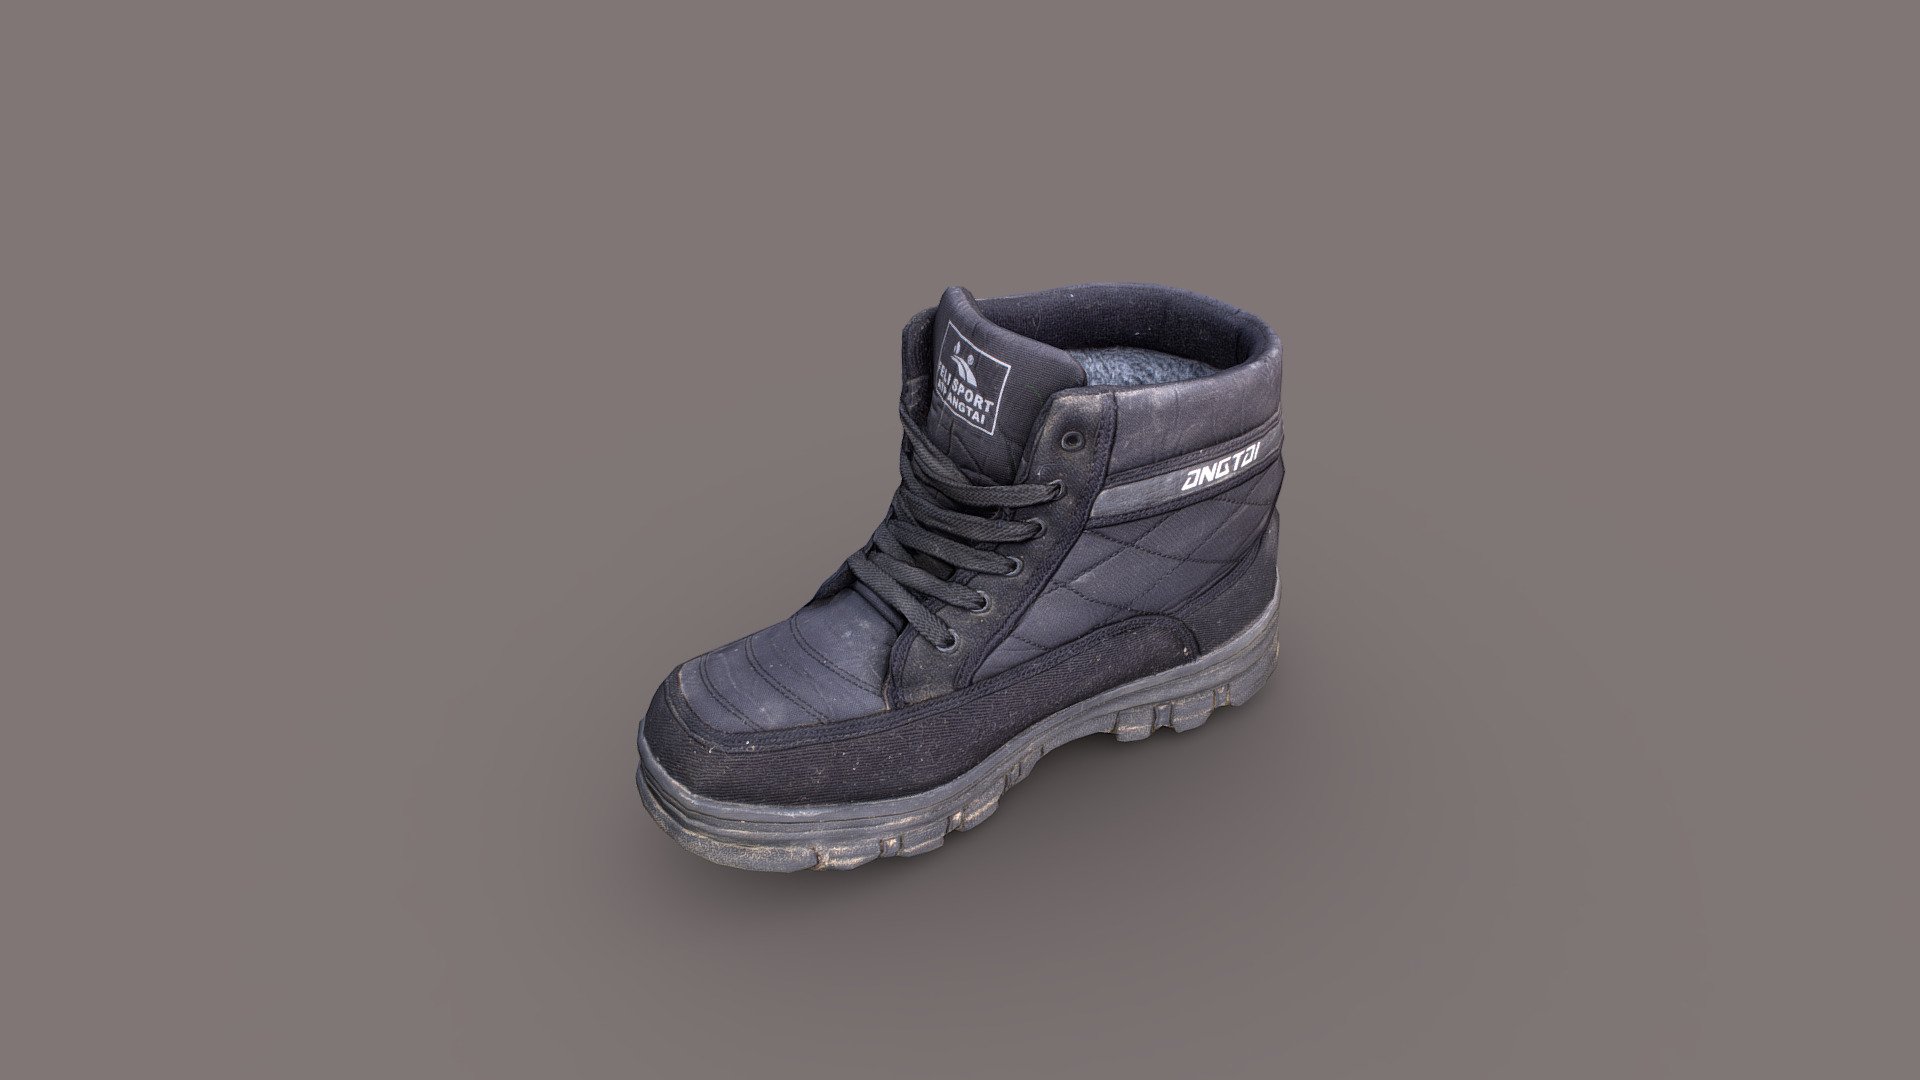 Boot low poly model